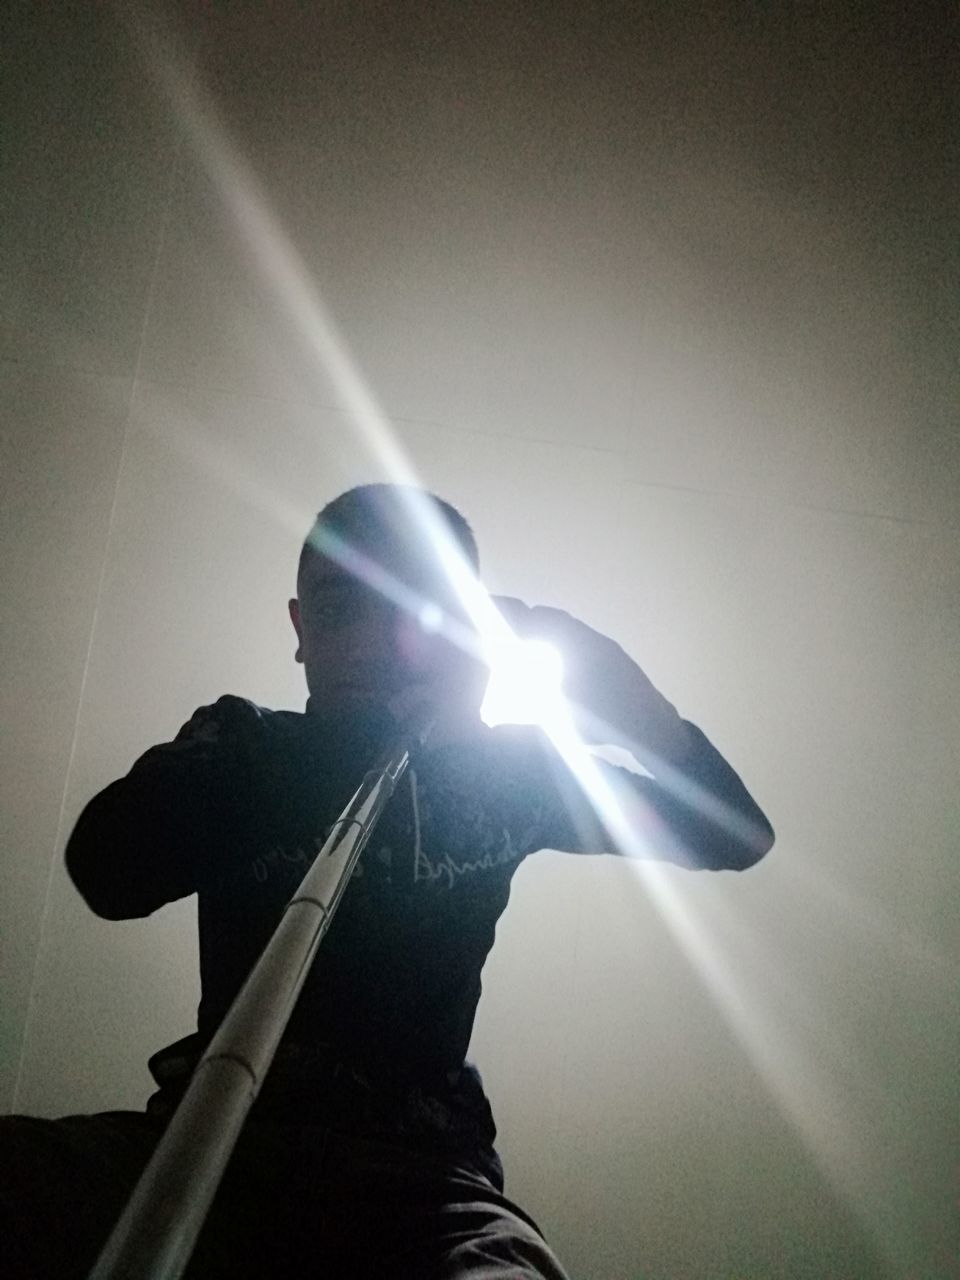 LOW ANGLE VIEW OF MAN WITH ILLUMINATED LIGHTING EQUIPMENT